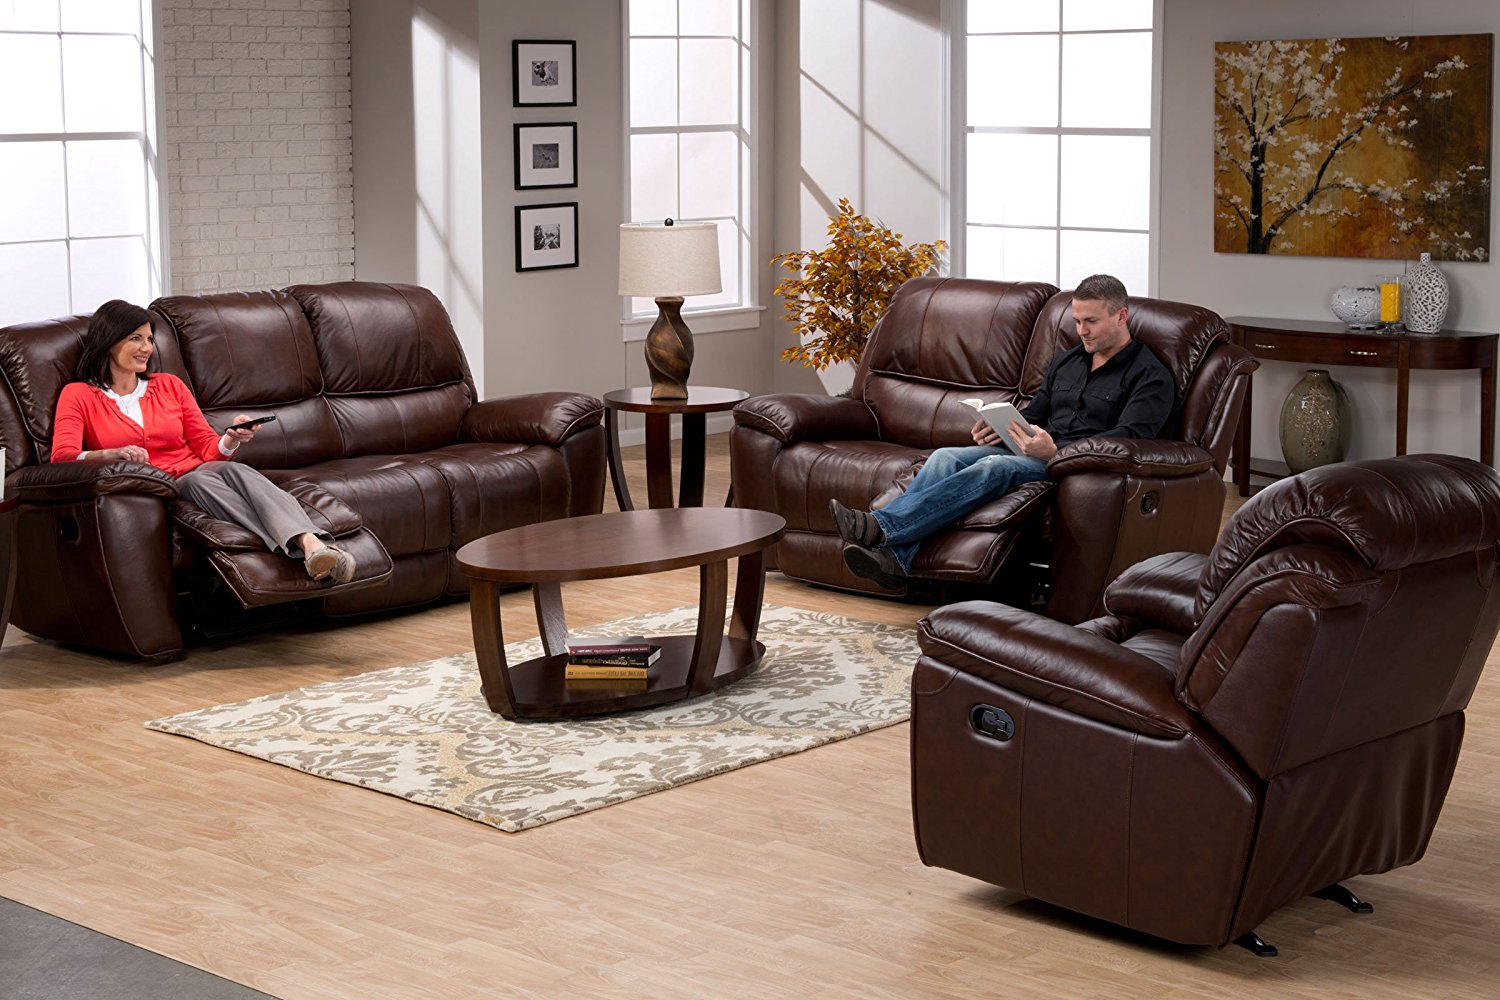 Top 10 Best Leather Reclining Sofa in 2021 Reviews | Buyer's Guide